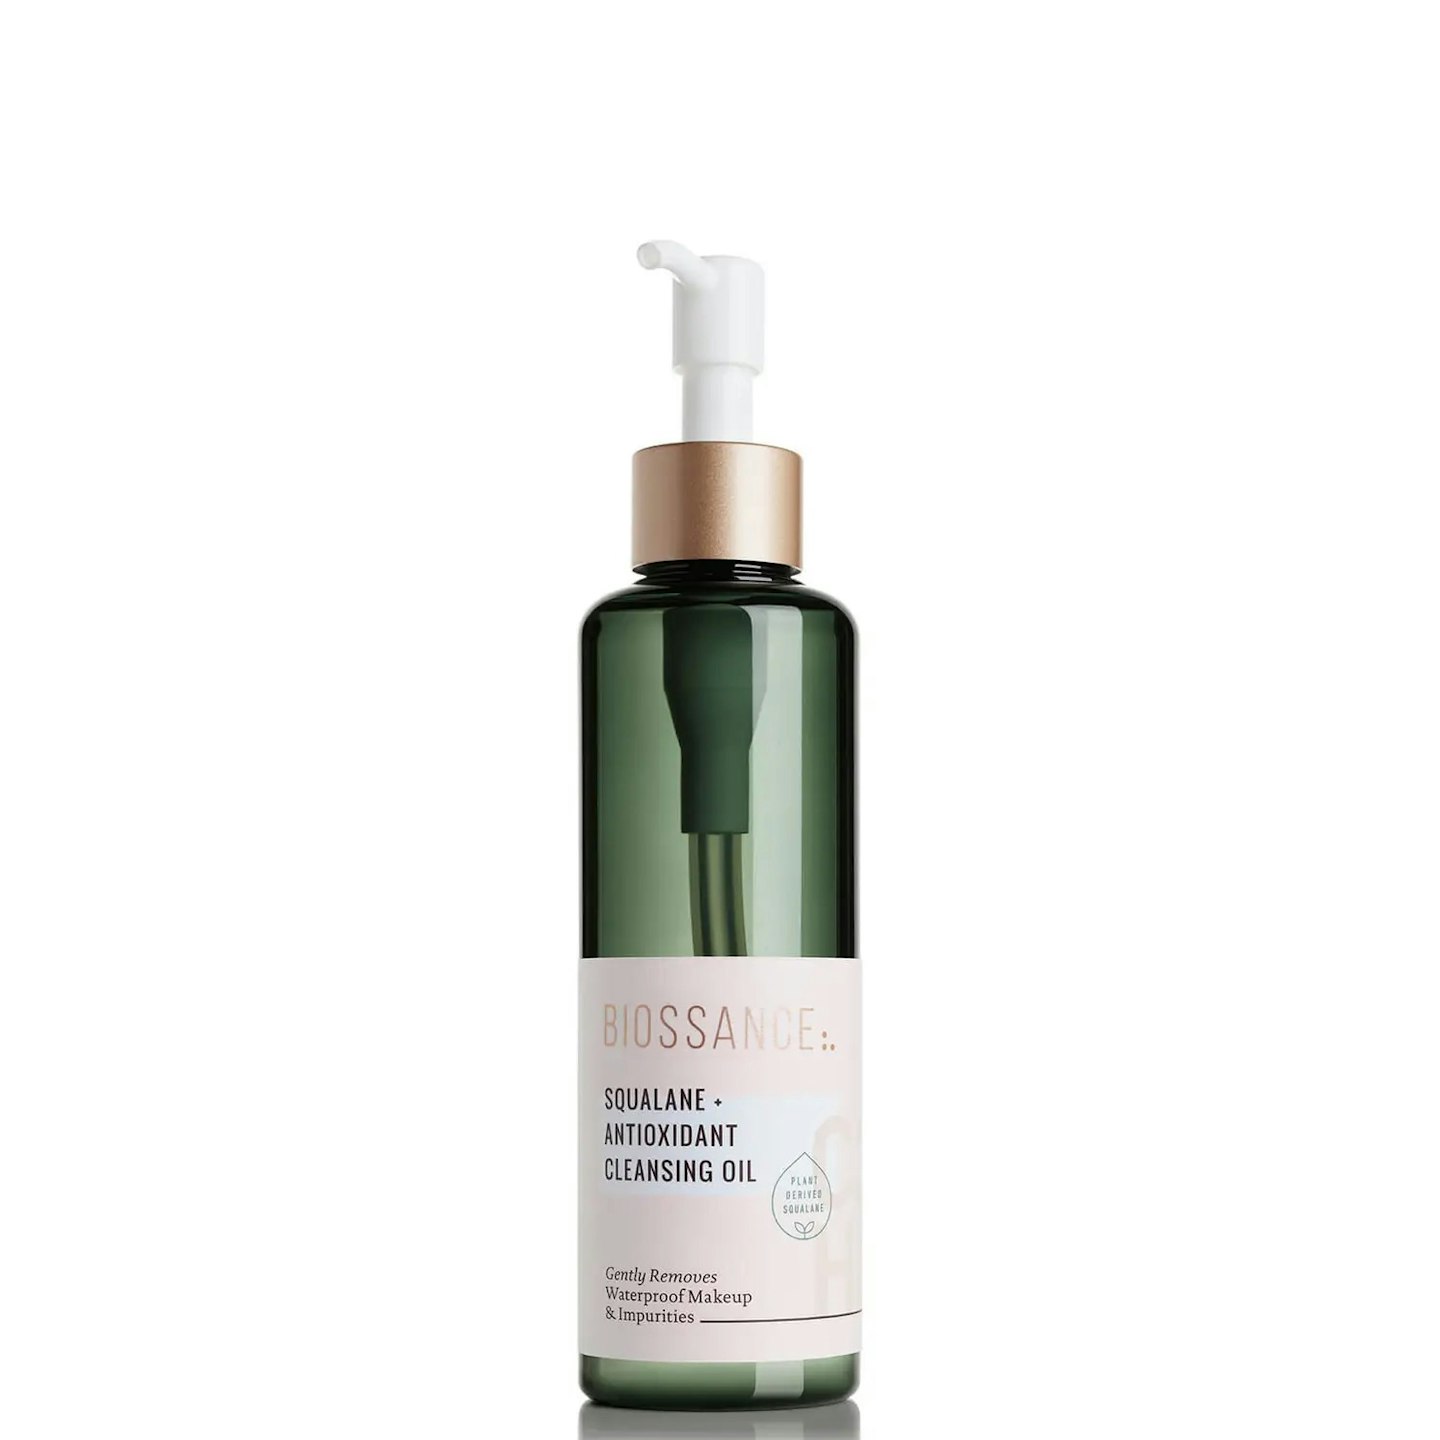 Biossance Squalane And Antioxidant Cleansing Oil